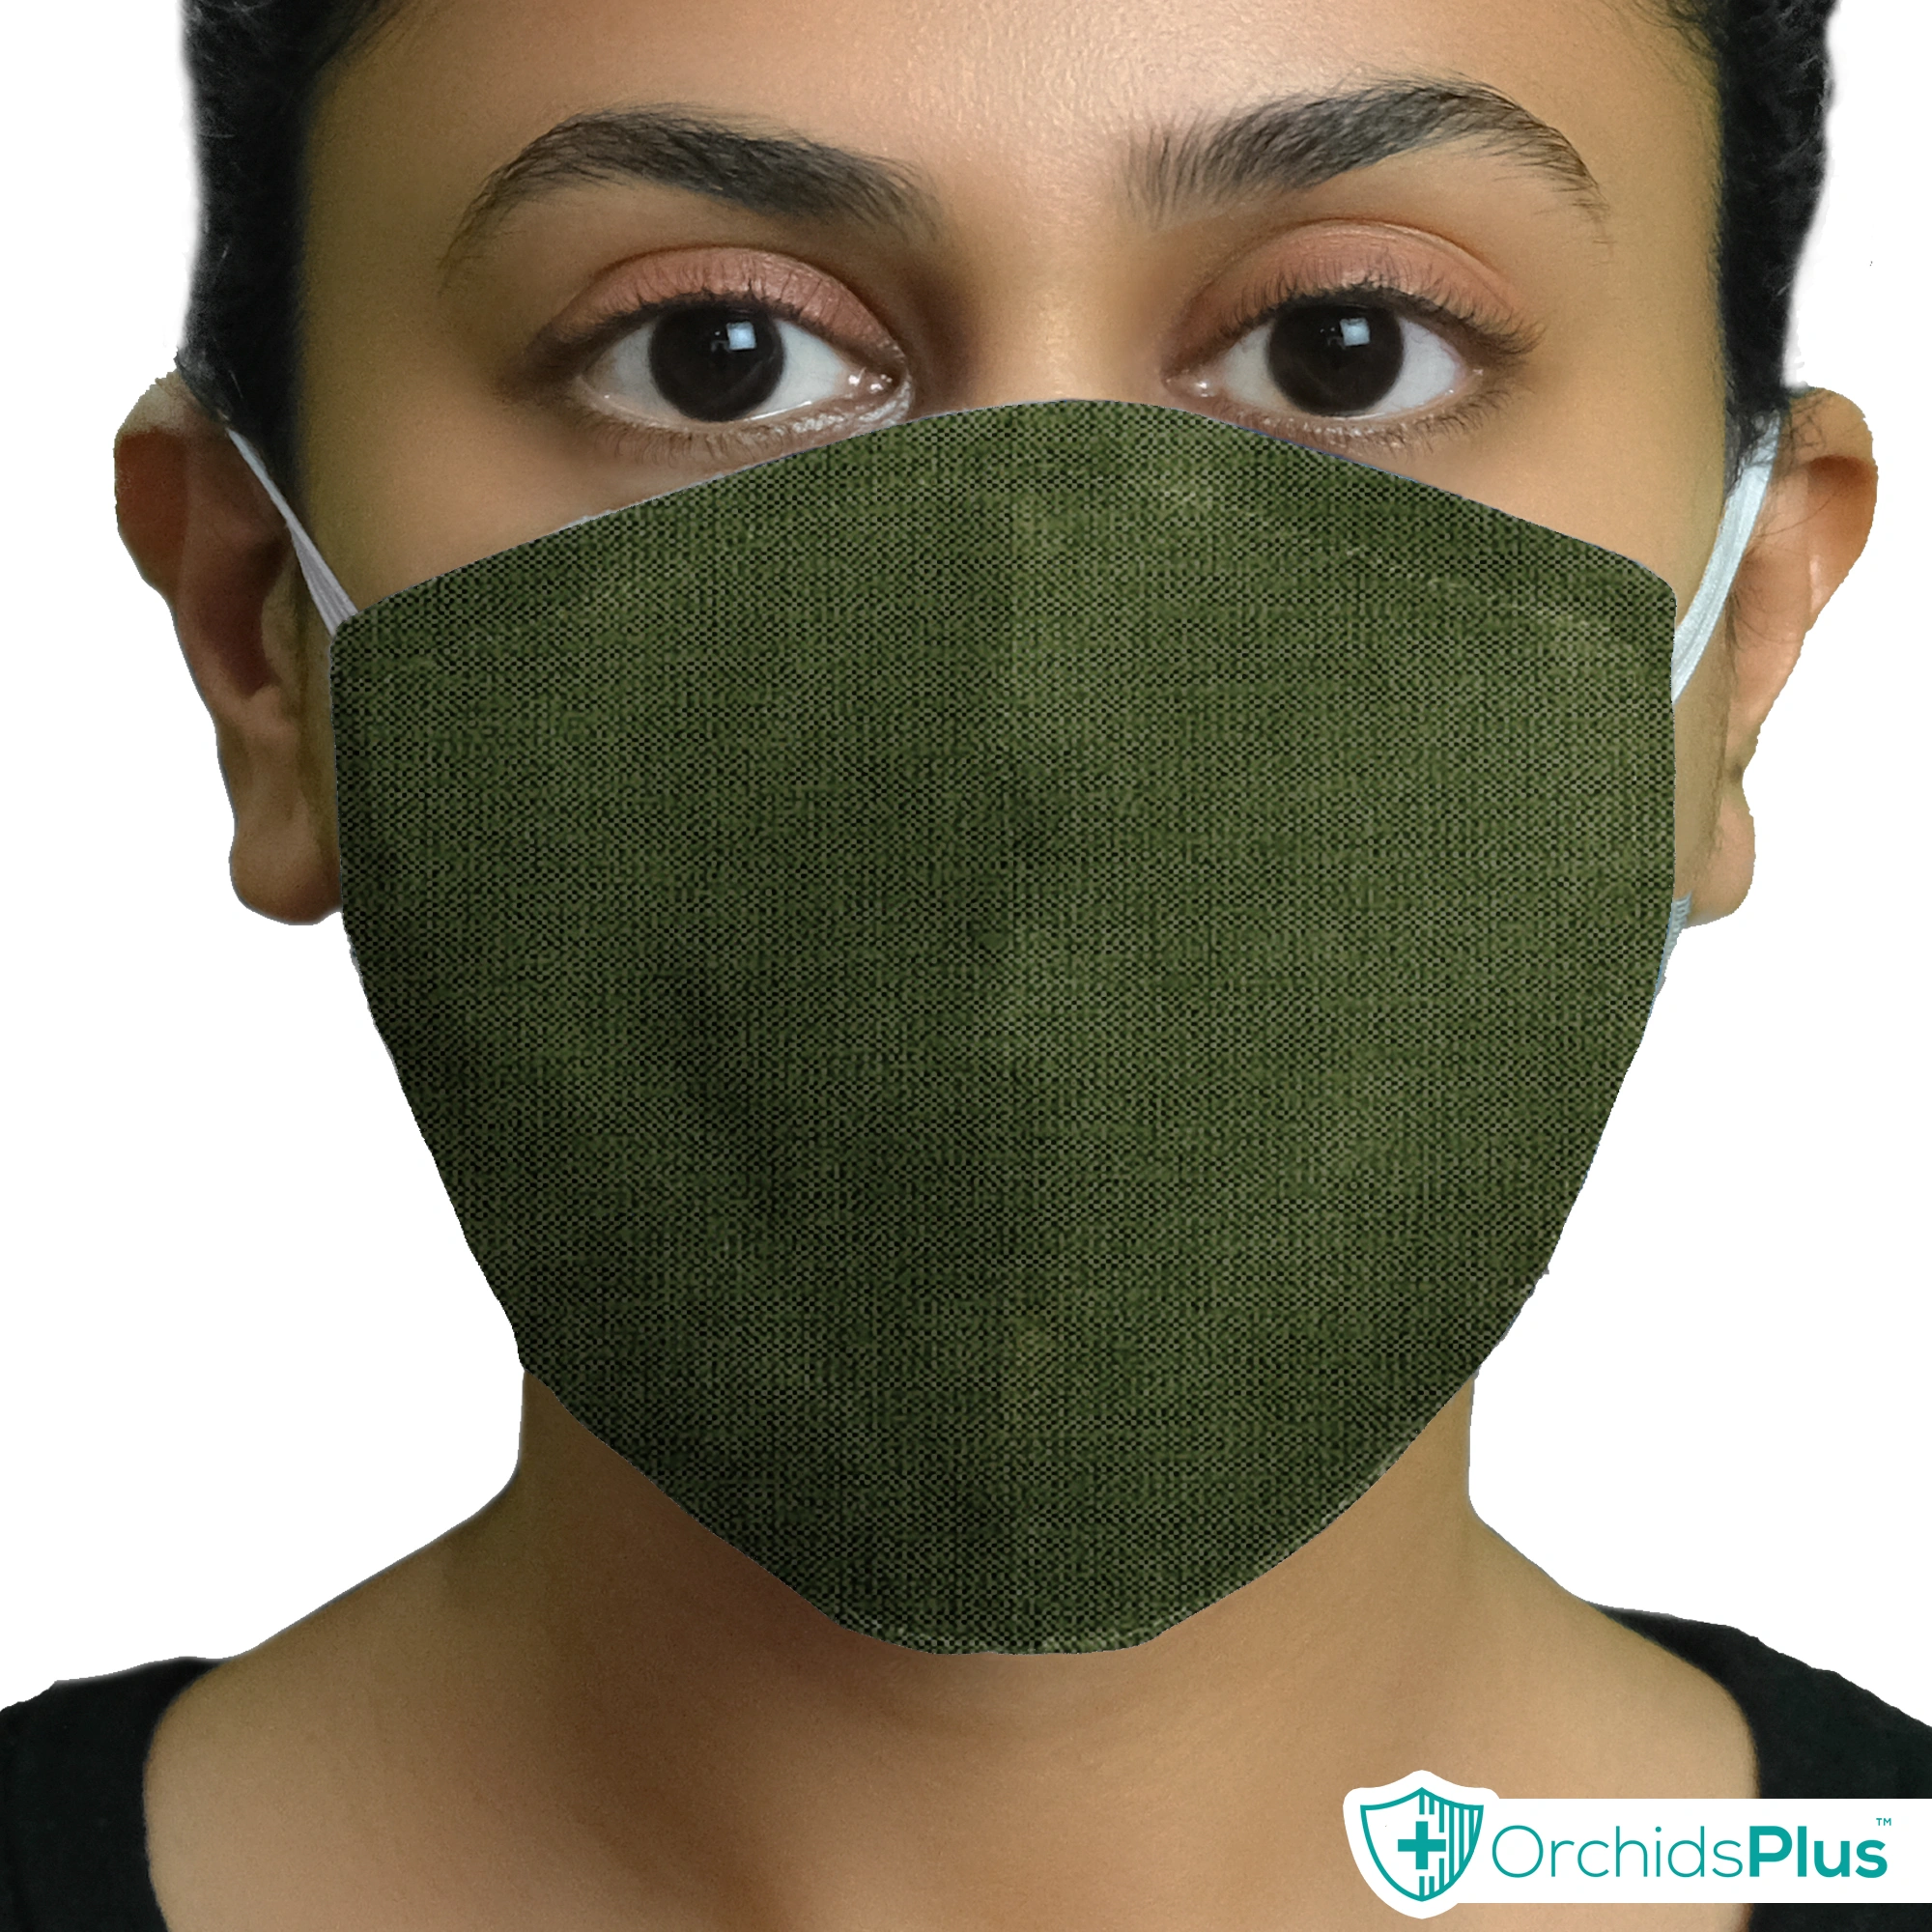 OrchidsPlus Active Face Mask 2+ Layer | Washable | Reusable | Active Protection - Green-5-2